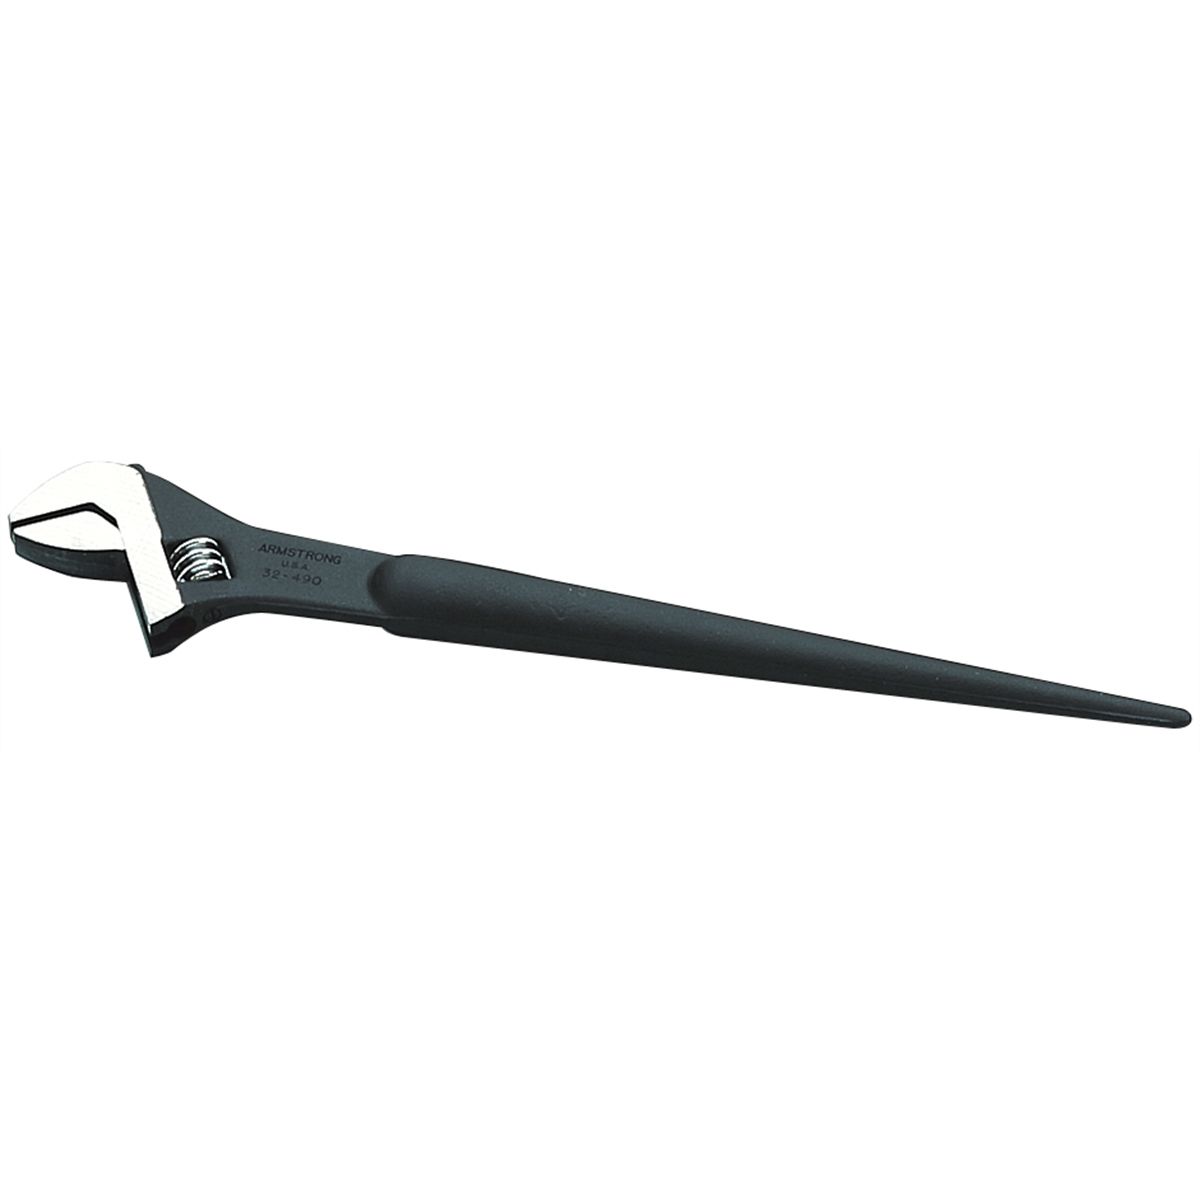 Construction Wrench - 1-1/2 In Capacity